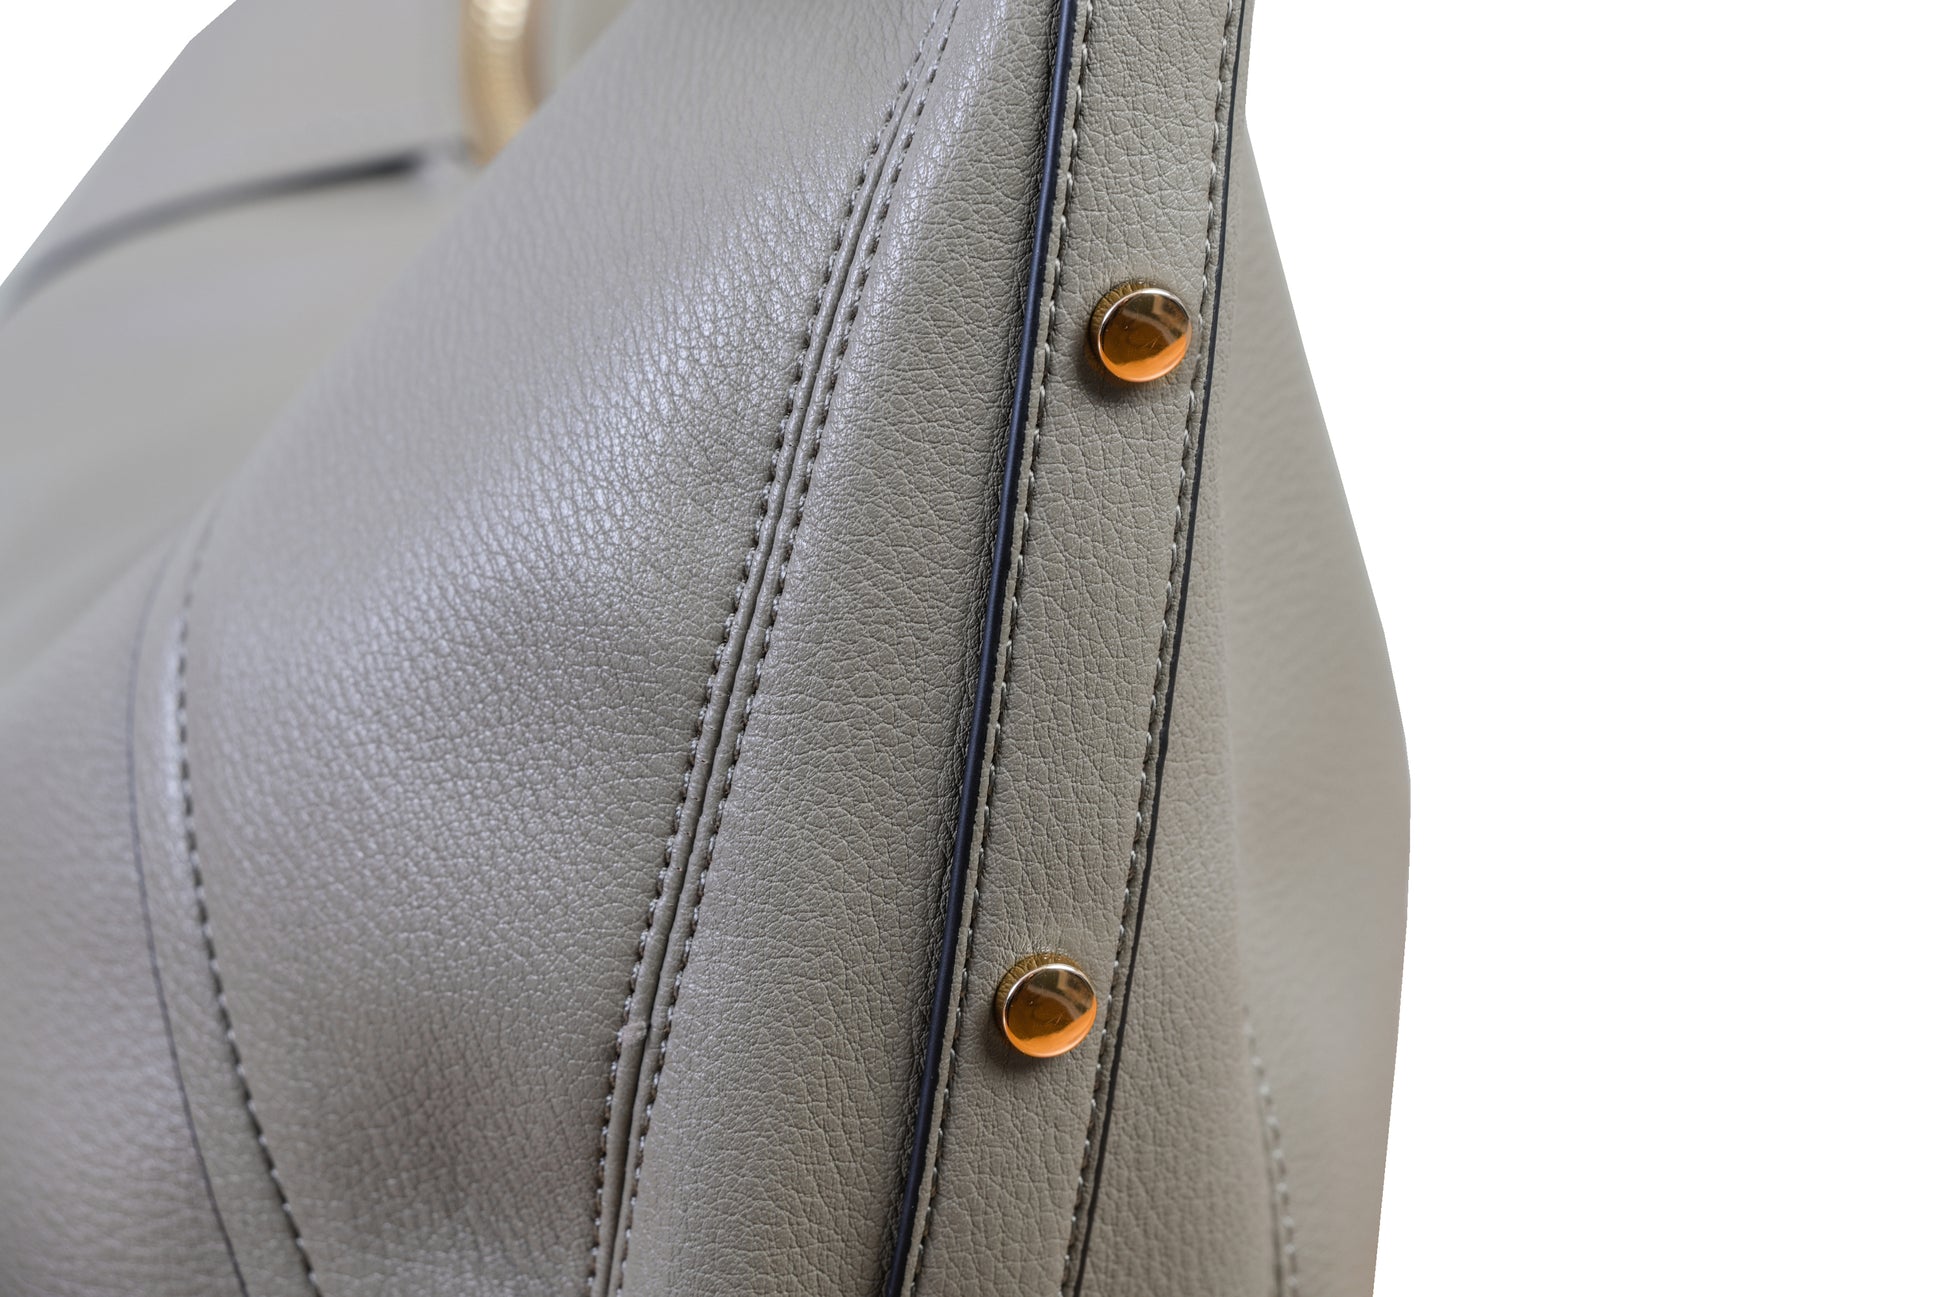 Luna Gray Crescent Pebble Grain Faux Leather Handbag made by Dewi Maya detail photo of gold rivets available at the best boutique in Upstate South Carolina Spartanburg Greenville Dewi Maya Boutique